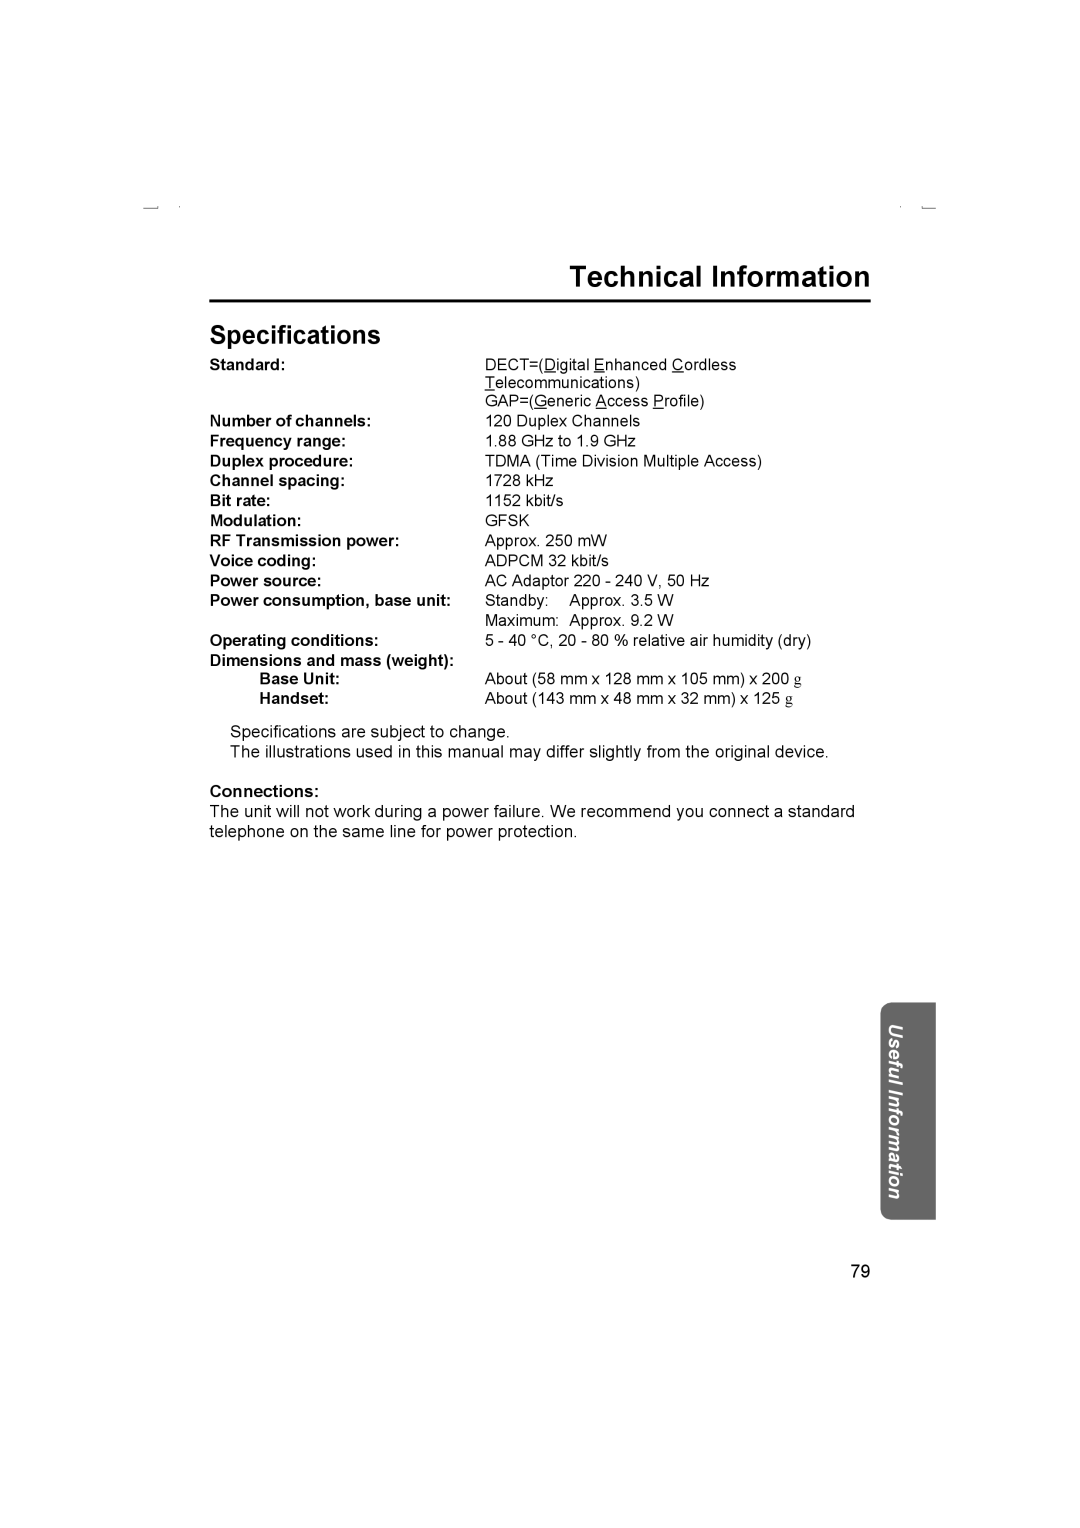 Panasonic KX-TCD510AL operating instructions Technical Information, Specifications, Connections 